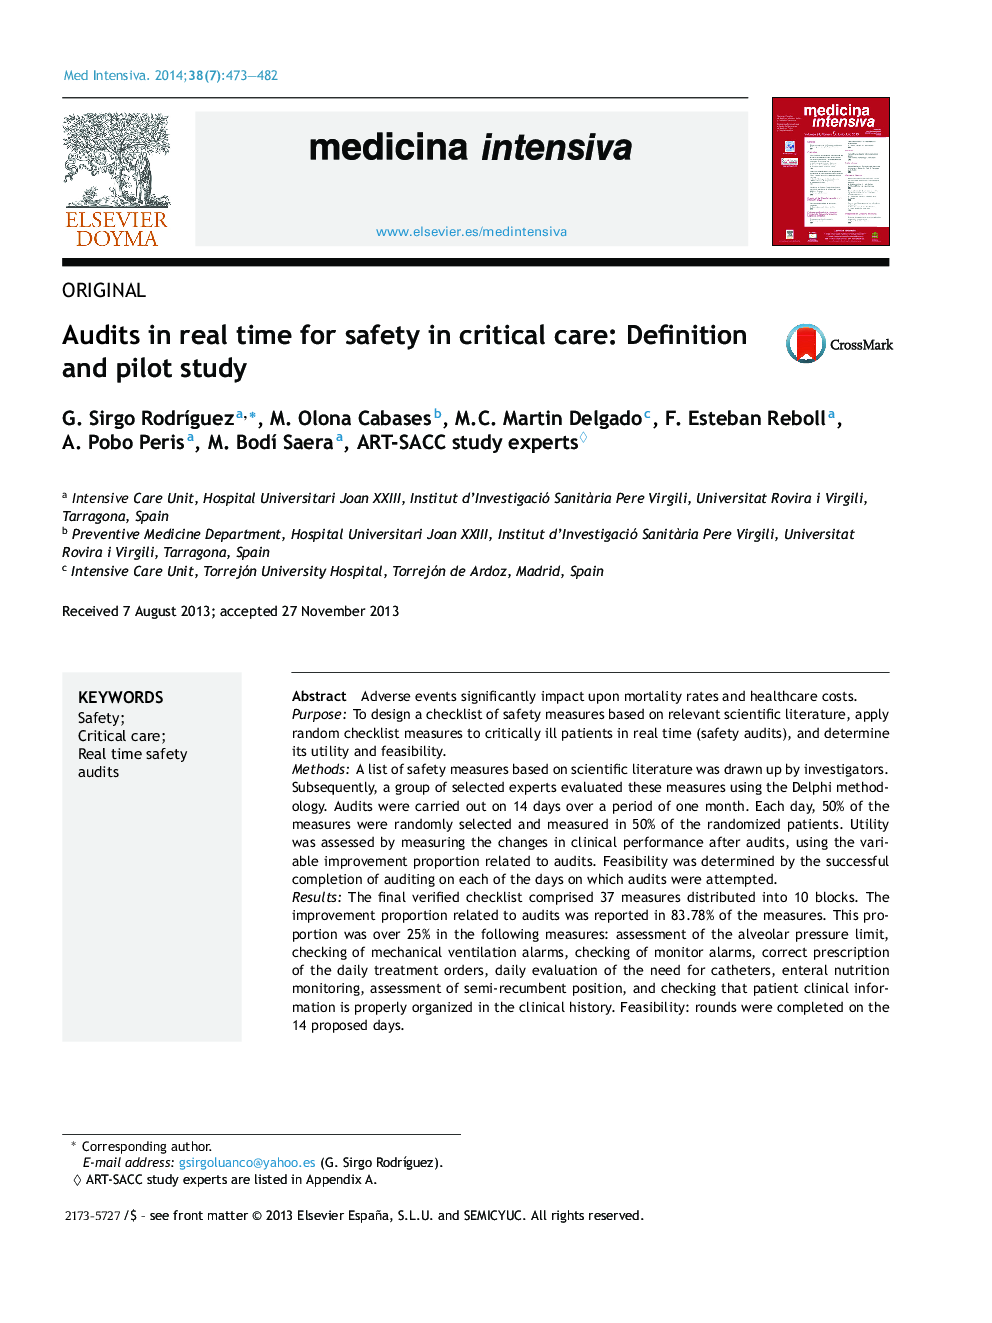 Audits in real time for safety in critical care: Definition and pilot study